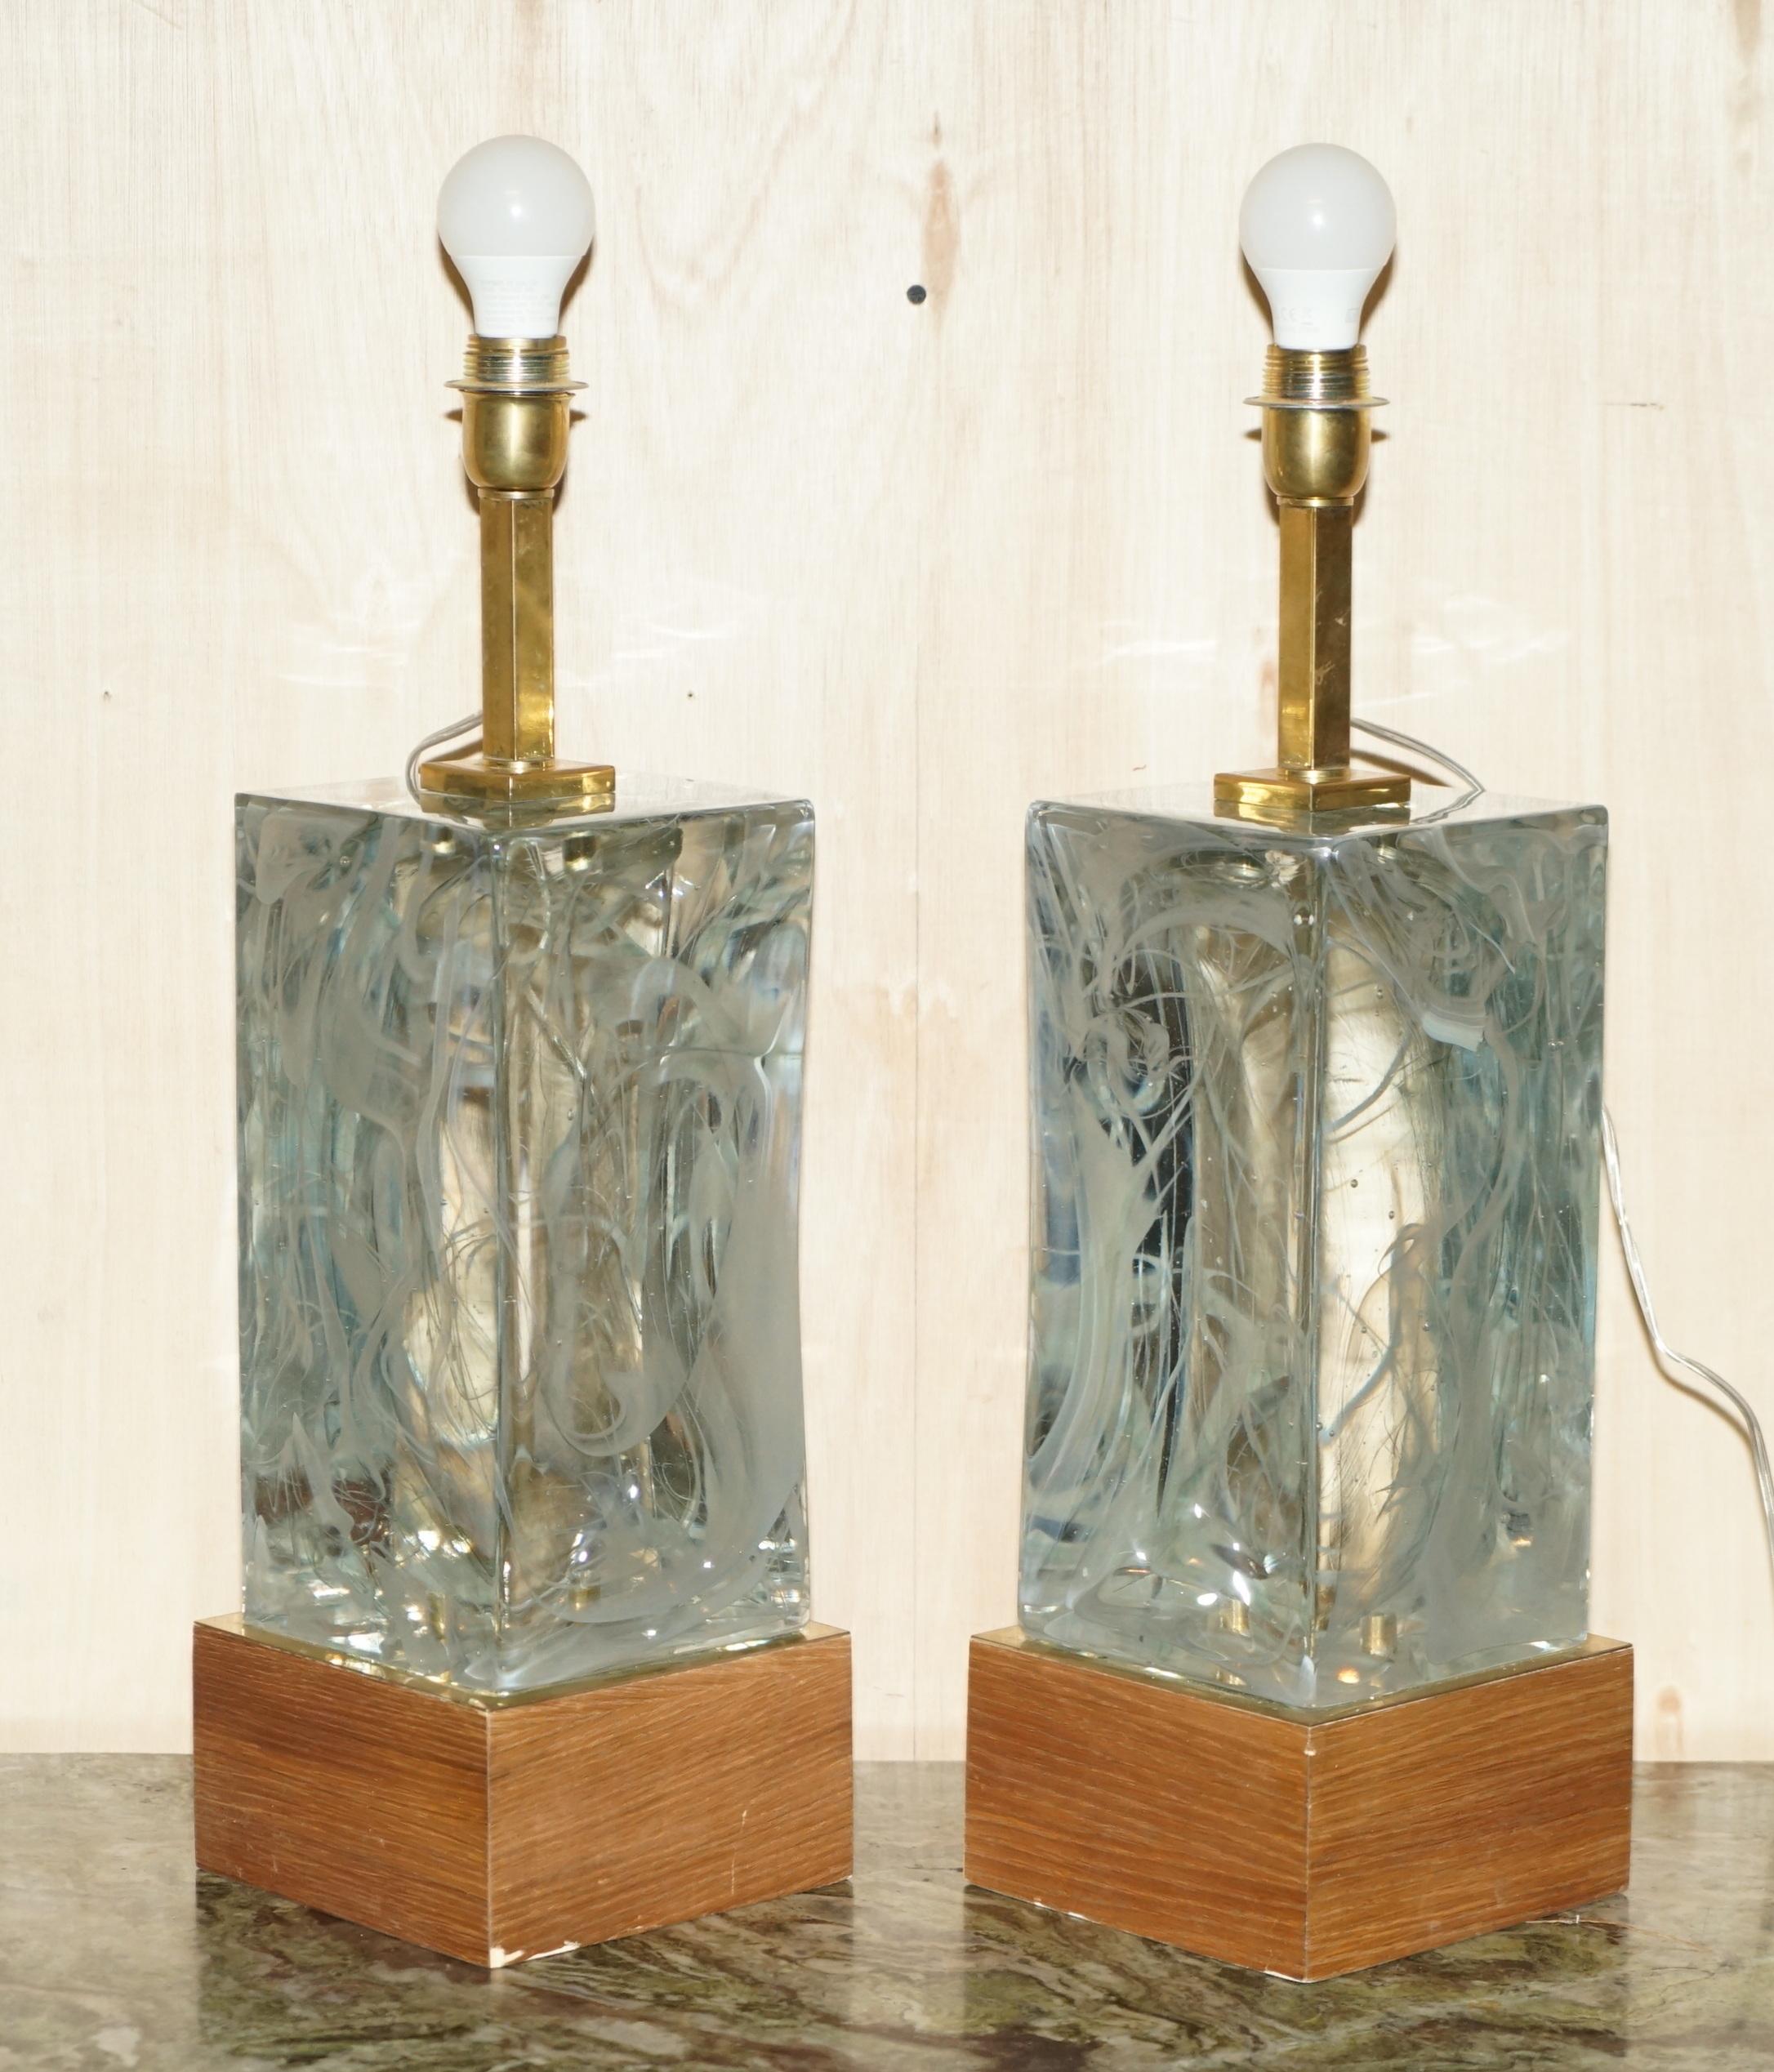 We are delighted to offer for sale this stunning pair of original Murano solid glass large table lamps with marble finish throughout.

These lamps are part of a large selection of Murano lamps that have come straight from the Island of Murano